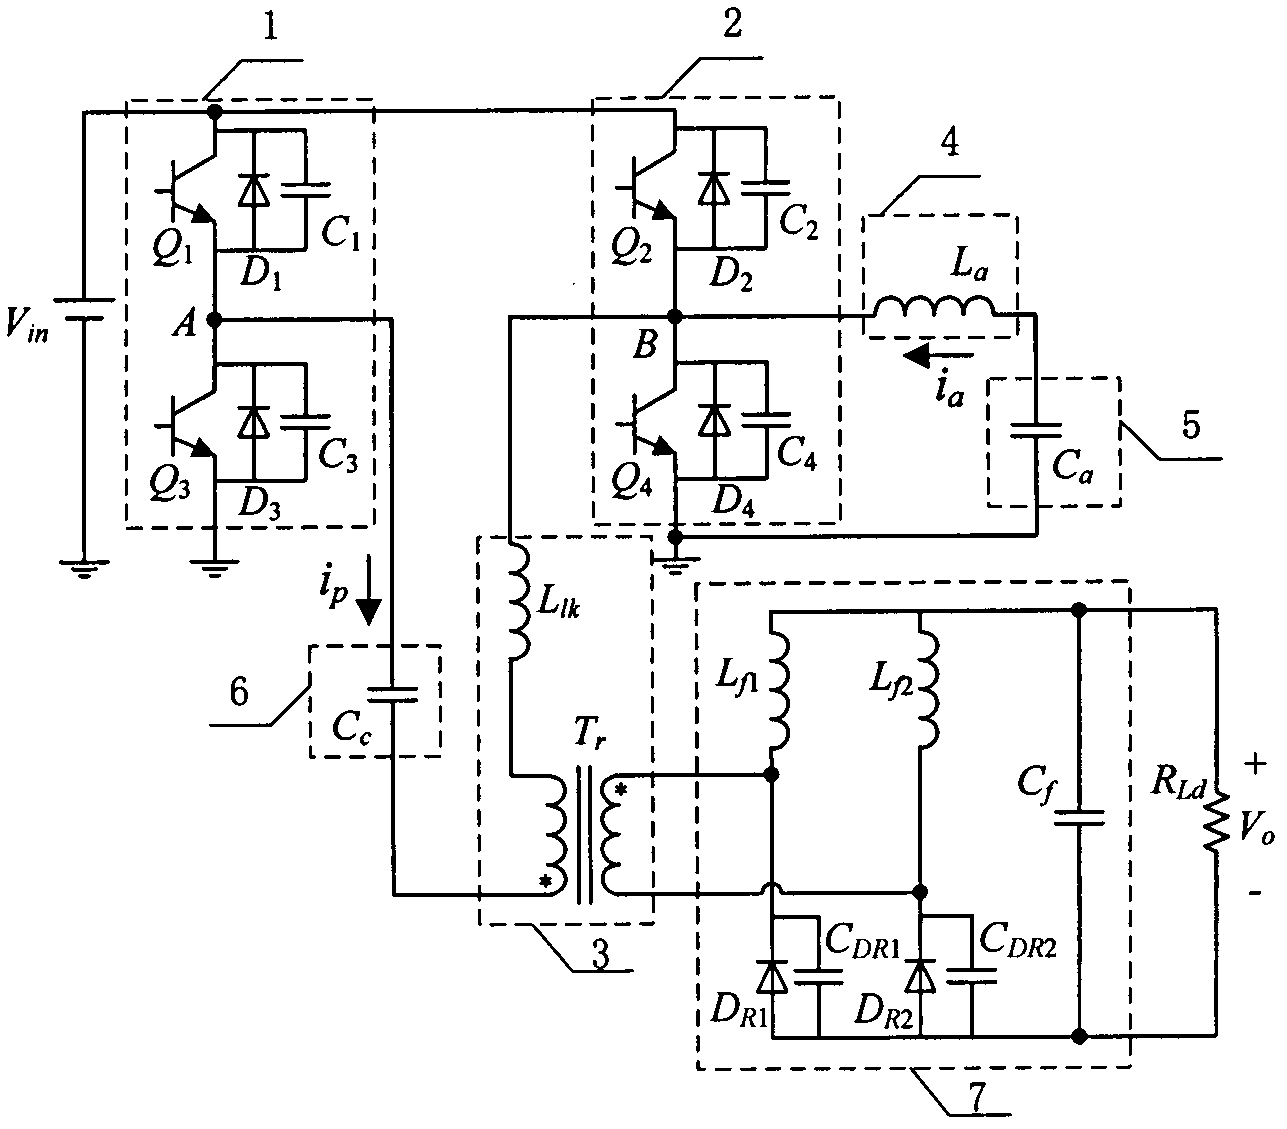 Wide-load-range zero-voltage-switching full-bridge transformer for effectively suppressing secondary-side voltage spikes